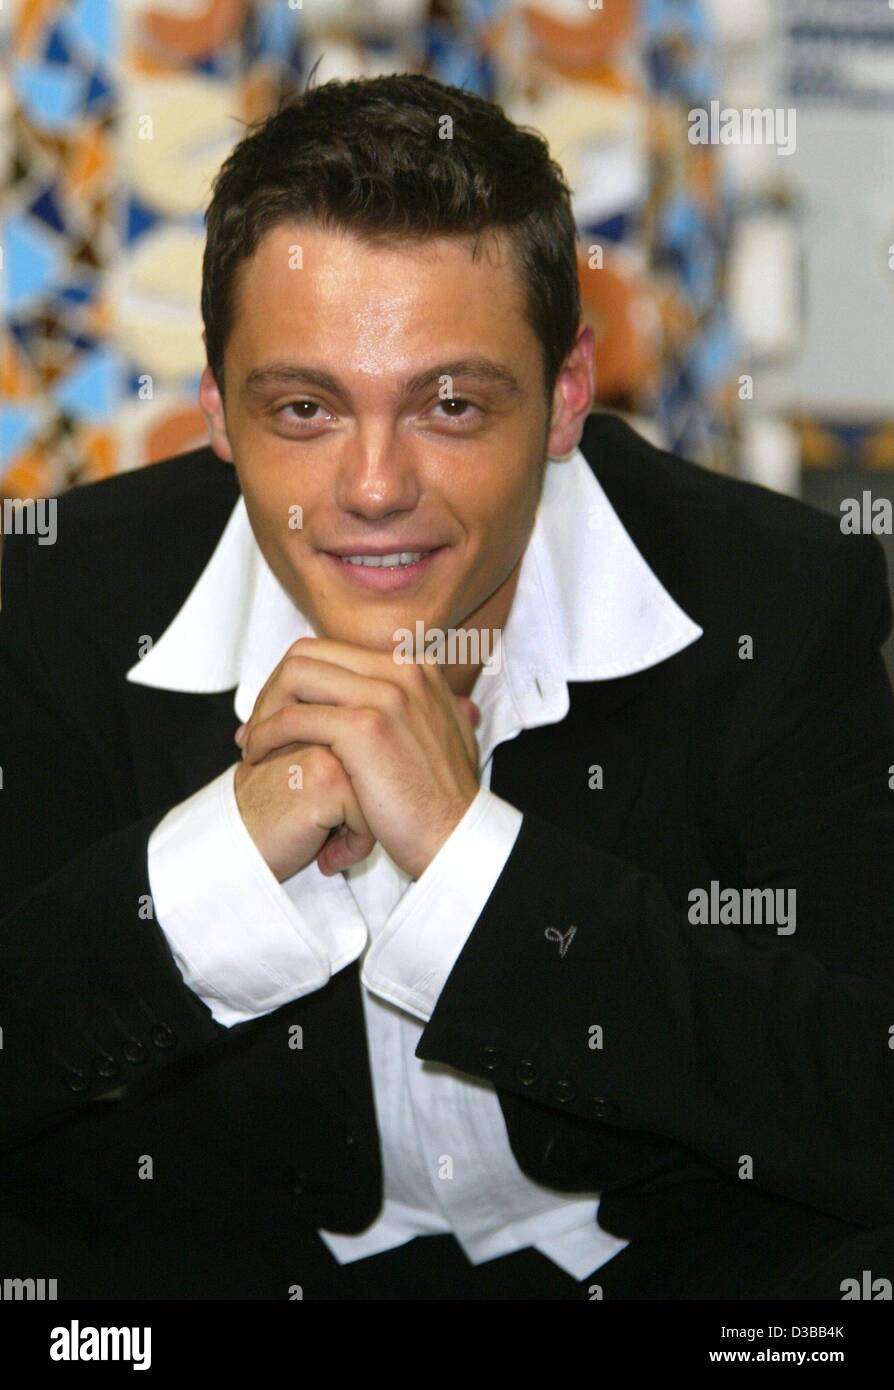 Tiziano ferro hi-res stock photography and images - Alamy